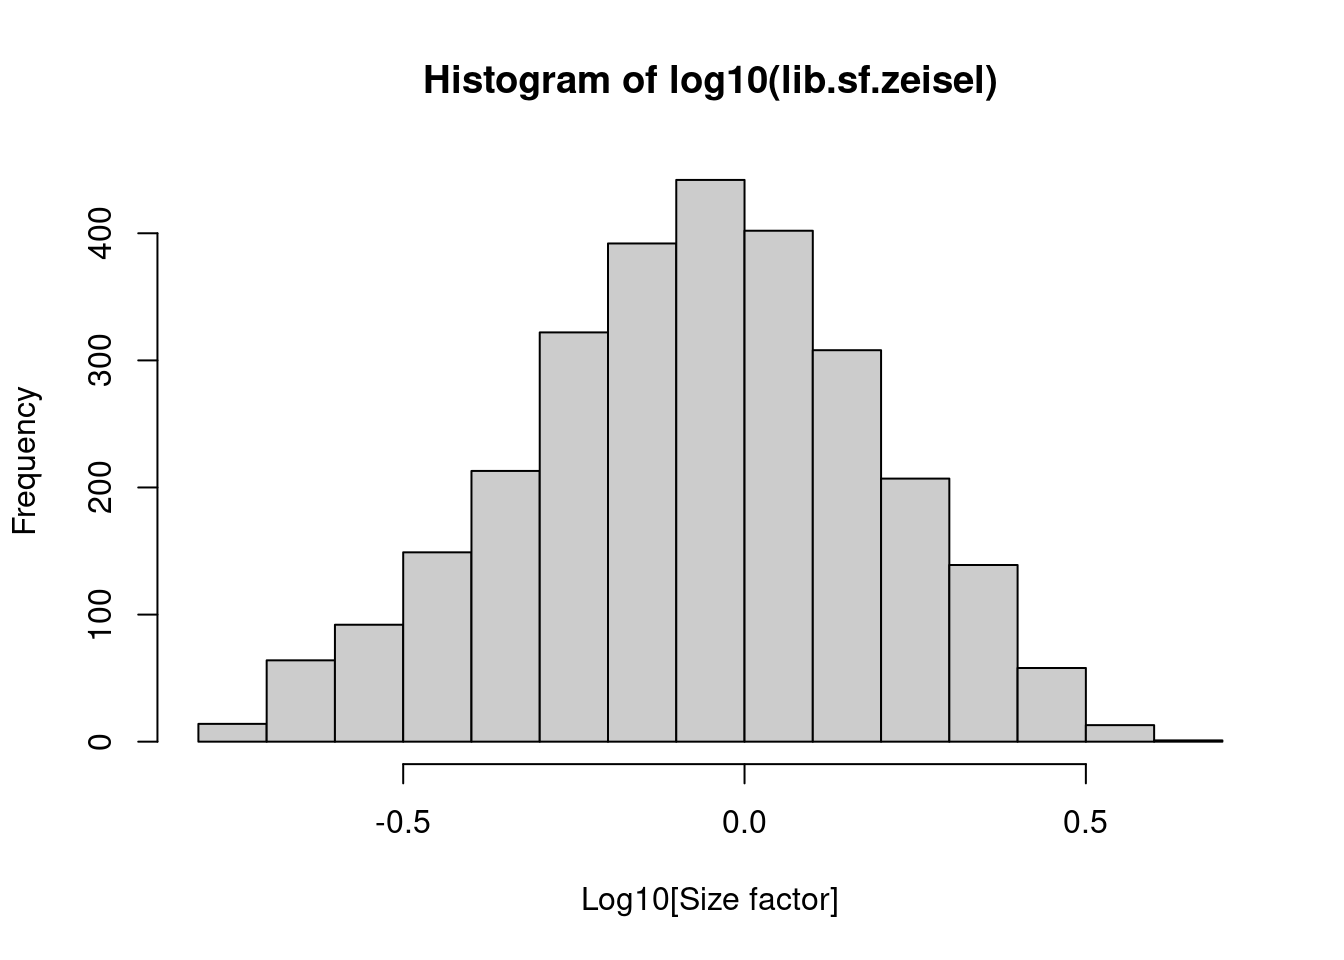 Distribution of size factors derived from the library size in the Zeisel brain dataset.